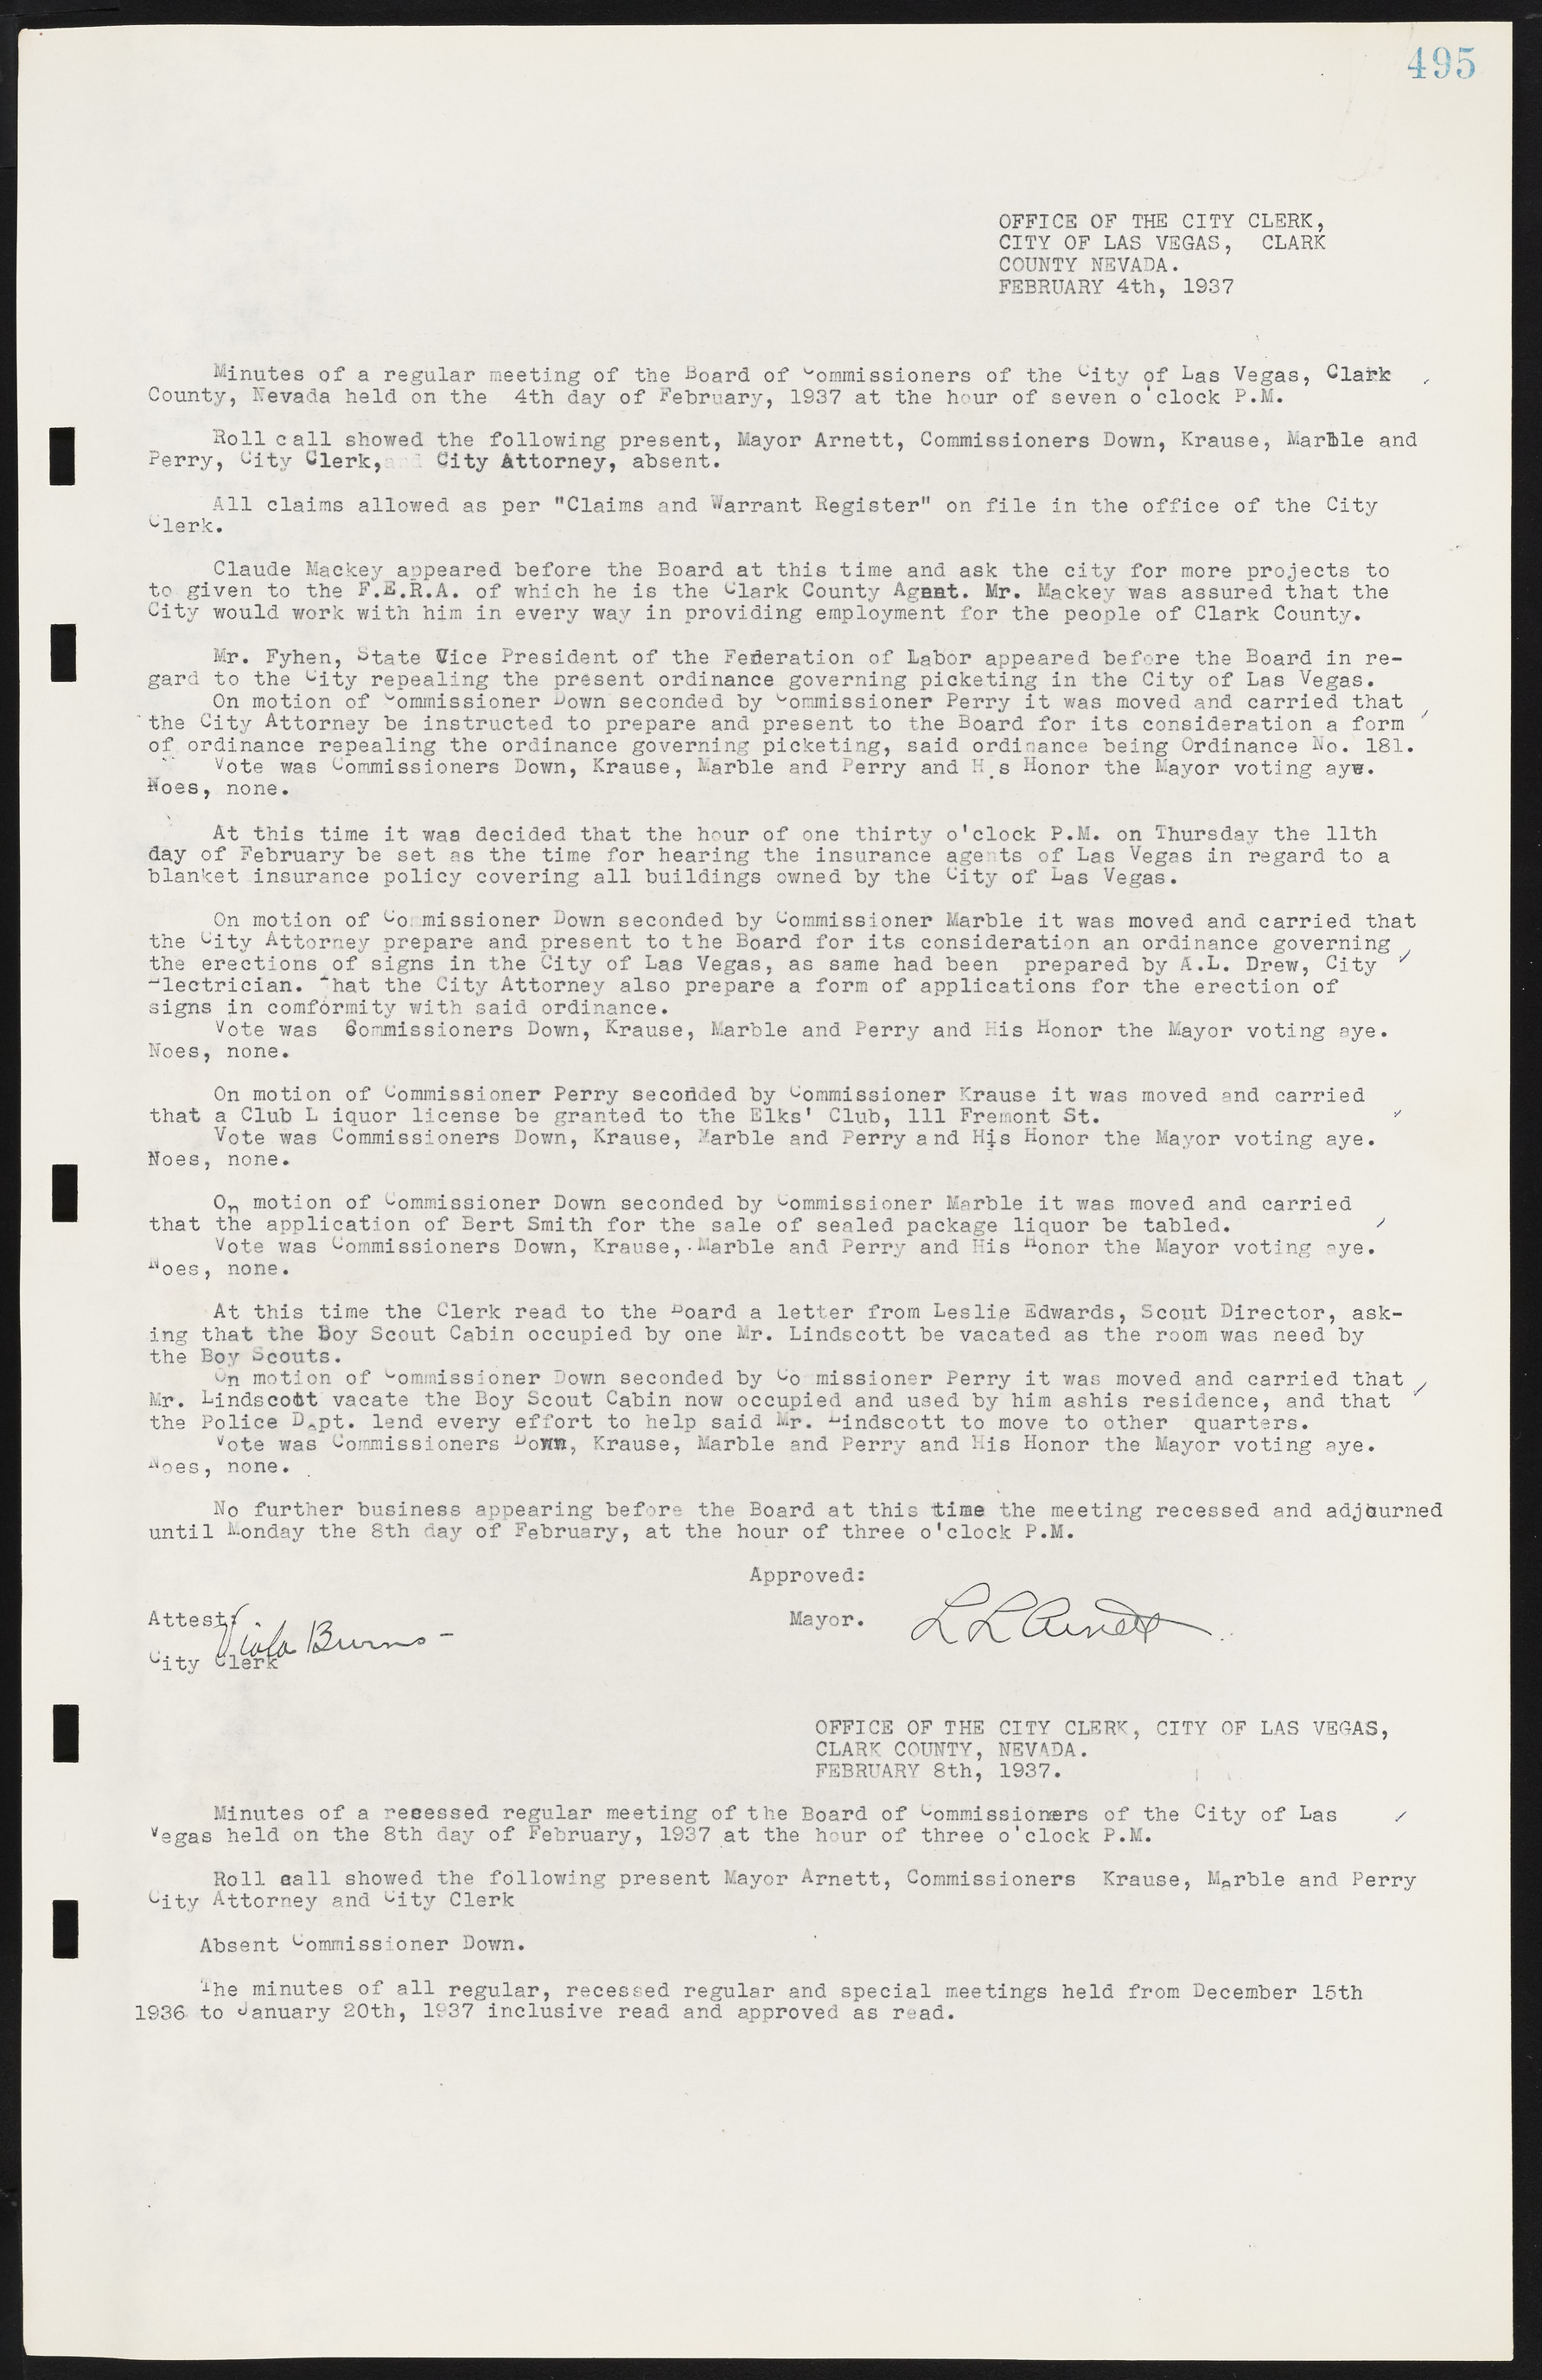 Las Vegas City Commission Minutes, May 14, 1929 to February 11, 1937, lvc000003-502